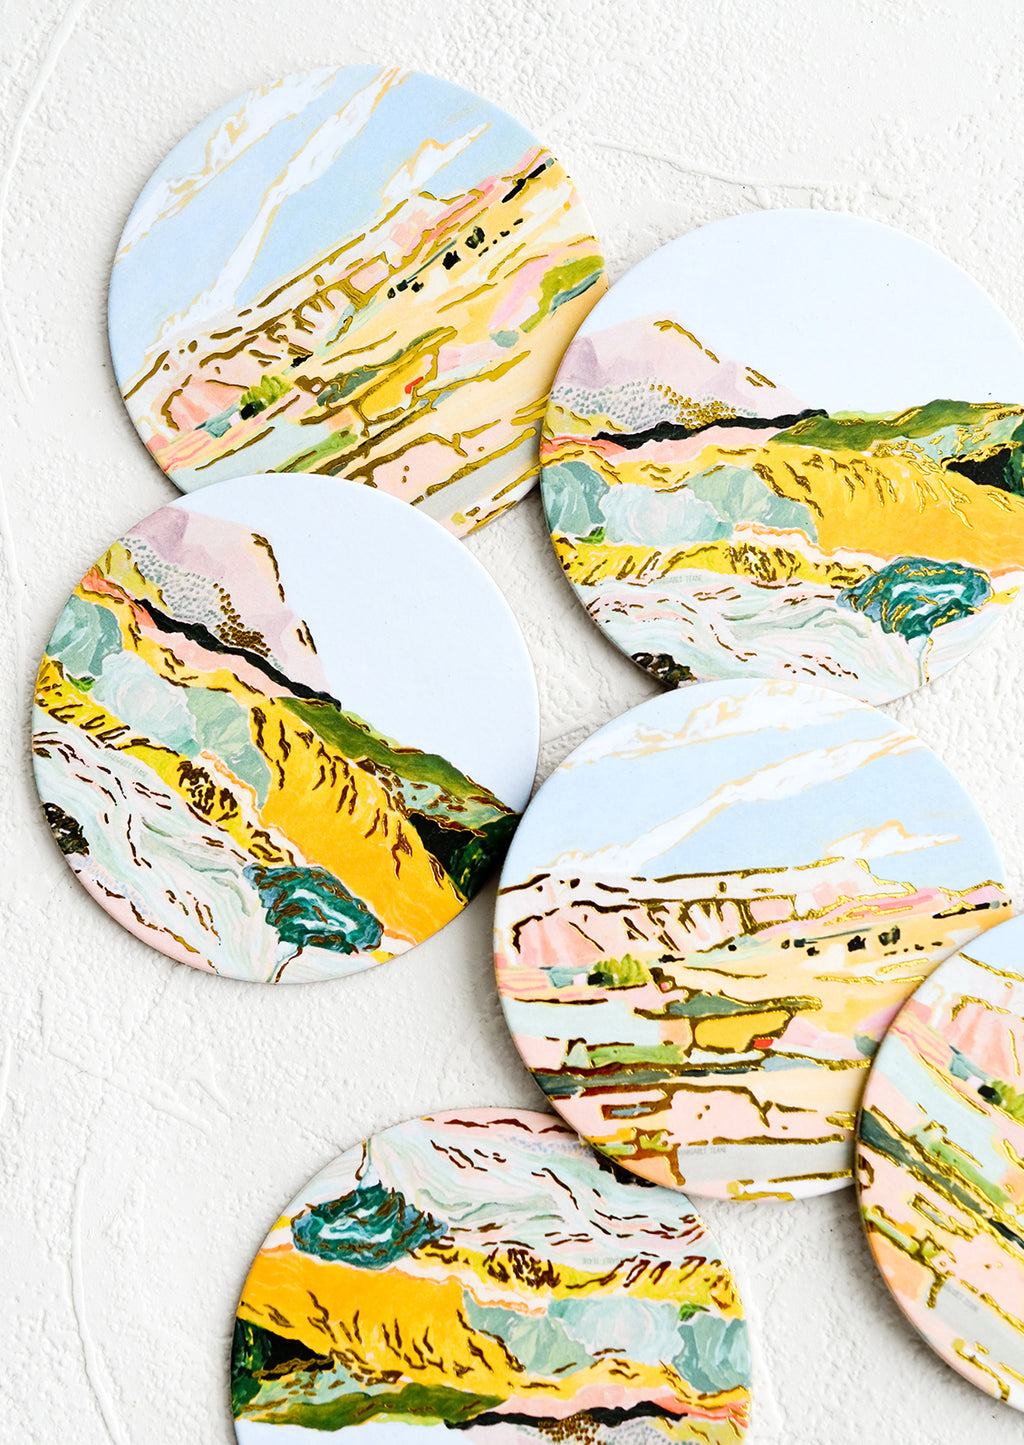 Amalfi Cliffs: A set of graphic print coasters with pastel imagery of mountains and cliffs.